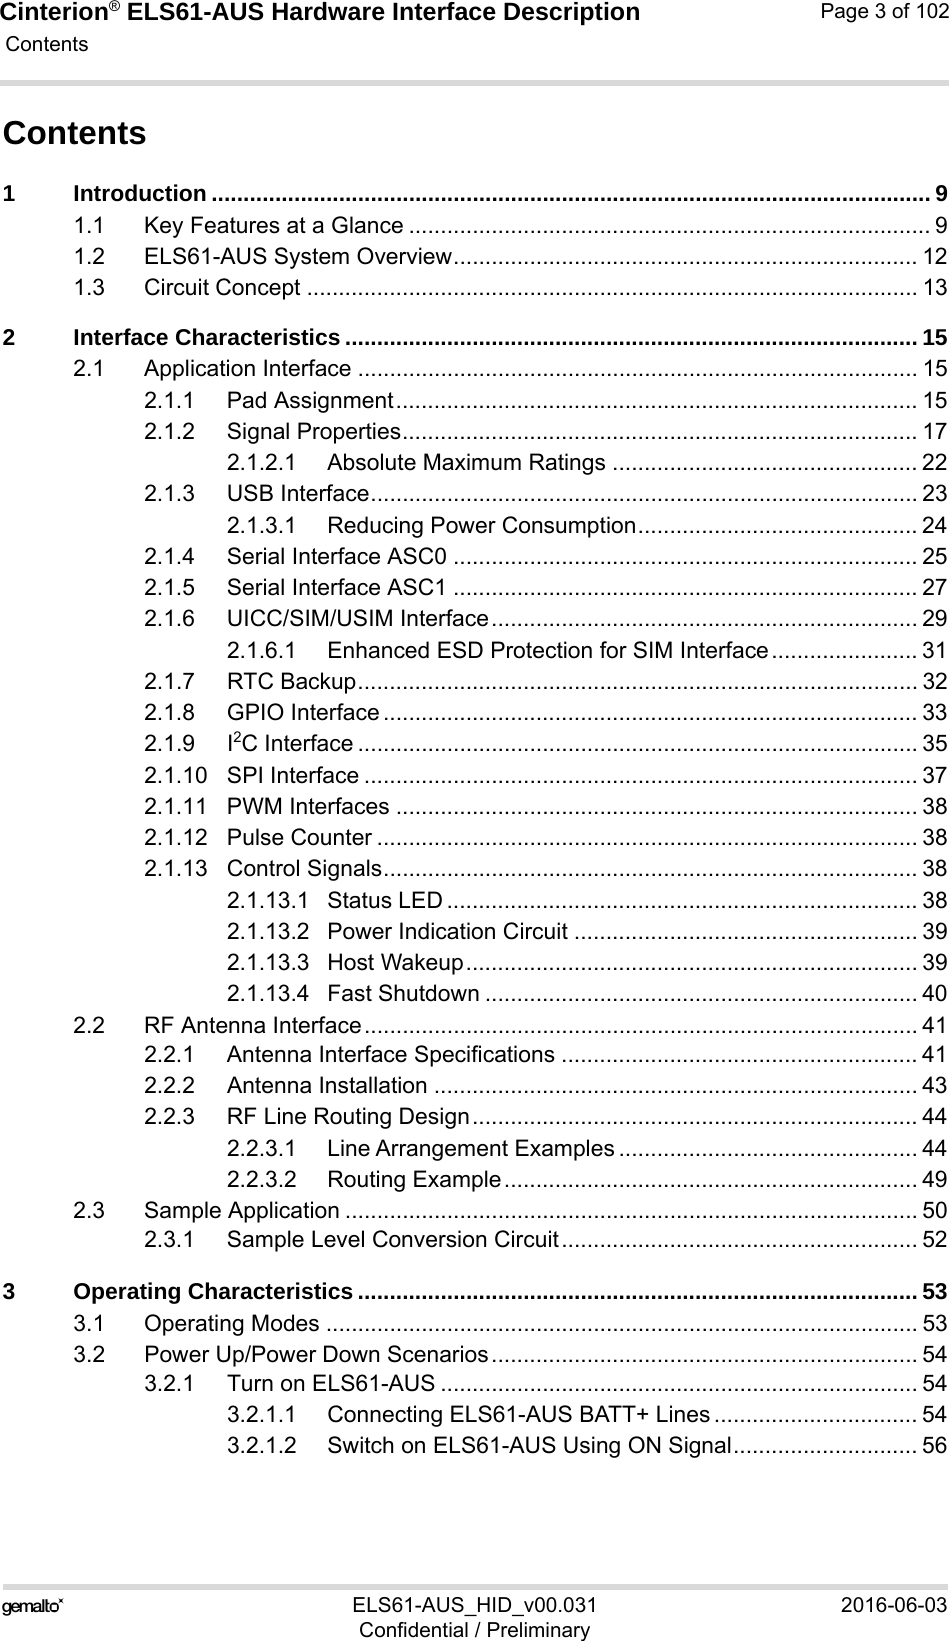 Cinterion® ELS61-AUS Hardware Interface Description Contents102ELS61-AUS_HID_v00.031 2016-06-03Confidential / PreliminaryPage 3 of 102Contents1 Introduction ................................................................................................................. 91.1 Key Features at a Glance .................................................................................. 91.2 ELS61-AUS System Overview......................................................................... 121.3 Circuit Concept ................................................................................................ 132 Interface Characteristics .......................................................................................... 152.1 Application Interface ........................................................................................ 152.1.1 Pad Assignment.................................................................................. 152.1.2 Signal Properties................................................................................. 172.1.2.1 Absolute Maximum Ratings ................................................ 222.1.3 USB Interface...................................................................................... 232.1.3.1 Reducing Power Consumption............................................ 242.1.4 Serial Interface ASC0 ......................................................................... 252.1.5 Serial Interface ASC1 ......................................................................... 272.1.6 UICC/SIM/USIM Interface................................................................... 292.1.6.1 Enhanced ESD Protection for SIM Interface....................... 312.1.7 RTC Backup........................................................................................ 322.1.8 GPIO Interface .................................................................................... 332.1.9 I2C Interface ........................................................................................ 352.1.10 SPI Interface ....................................................................................... 372.1.11 PWM Interfaces .................................................................................. 382.1.12 Pulse Counter ..................................................................................... 382.1.13 Control Signals.................................................................................... 382.1.13.1 Status LED .......................................................................... 382.1.13.2 Power Indication Circuit ...................................................... 392.1.13.3 Host Wakeup....................................................................... 392.1.13.4 Fast Shutdown .................................................................... 402.2 RF Antenna Interface....................................................................................... 412.2.1 Antenna Interface Specifications ........................................................ 412.2.2 Antenna Installation ............................................................................ 432.2.3 RF Line Routing Design...................................................................... 442.2.3.1 Line Arrangement Examples ............................................... 442.2.3.2 Routing Example................................................................. 492.3 Sample Application .......................................................................................... 502.3.1 Sample Level Conversion Circuit........................................................ 523 Operating Characteristics ........................................................................................ 533.1 Operating Modes ............................................................................................. 533.2 Power Up/Power Down Scenarios................................................................... 543.2.1 Turn on ELS61-AUS ........................................................................... 543.2.1.1 Connecting ELS61-AUS BATT+ Lines ................................ 543.2.1.2 Switch on ELS61-AUS Using ON Signal............................. 56